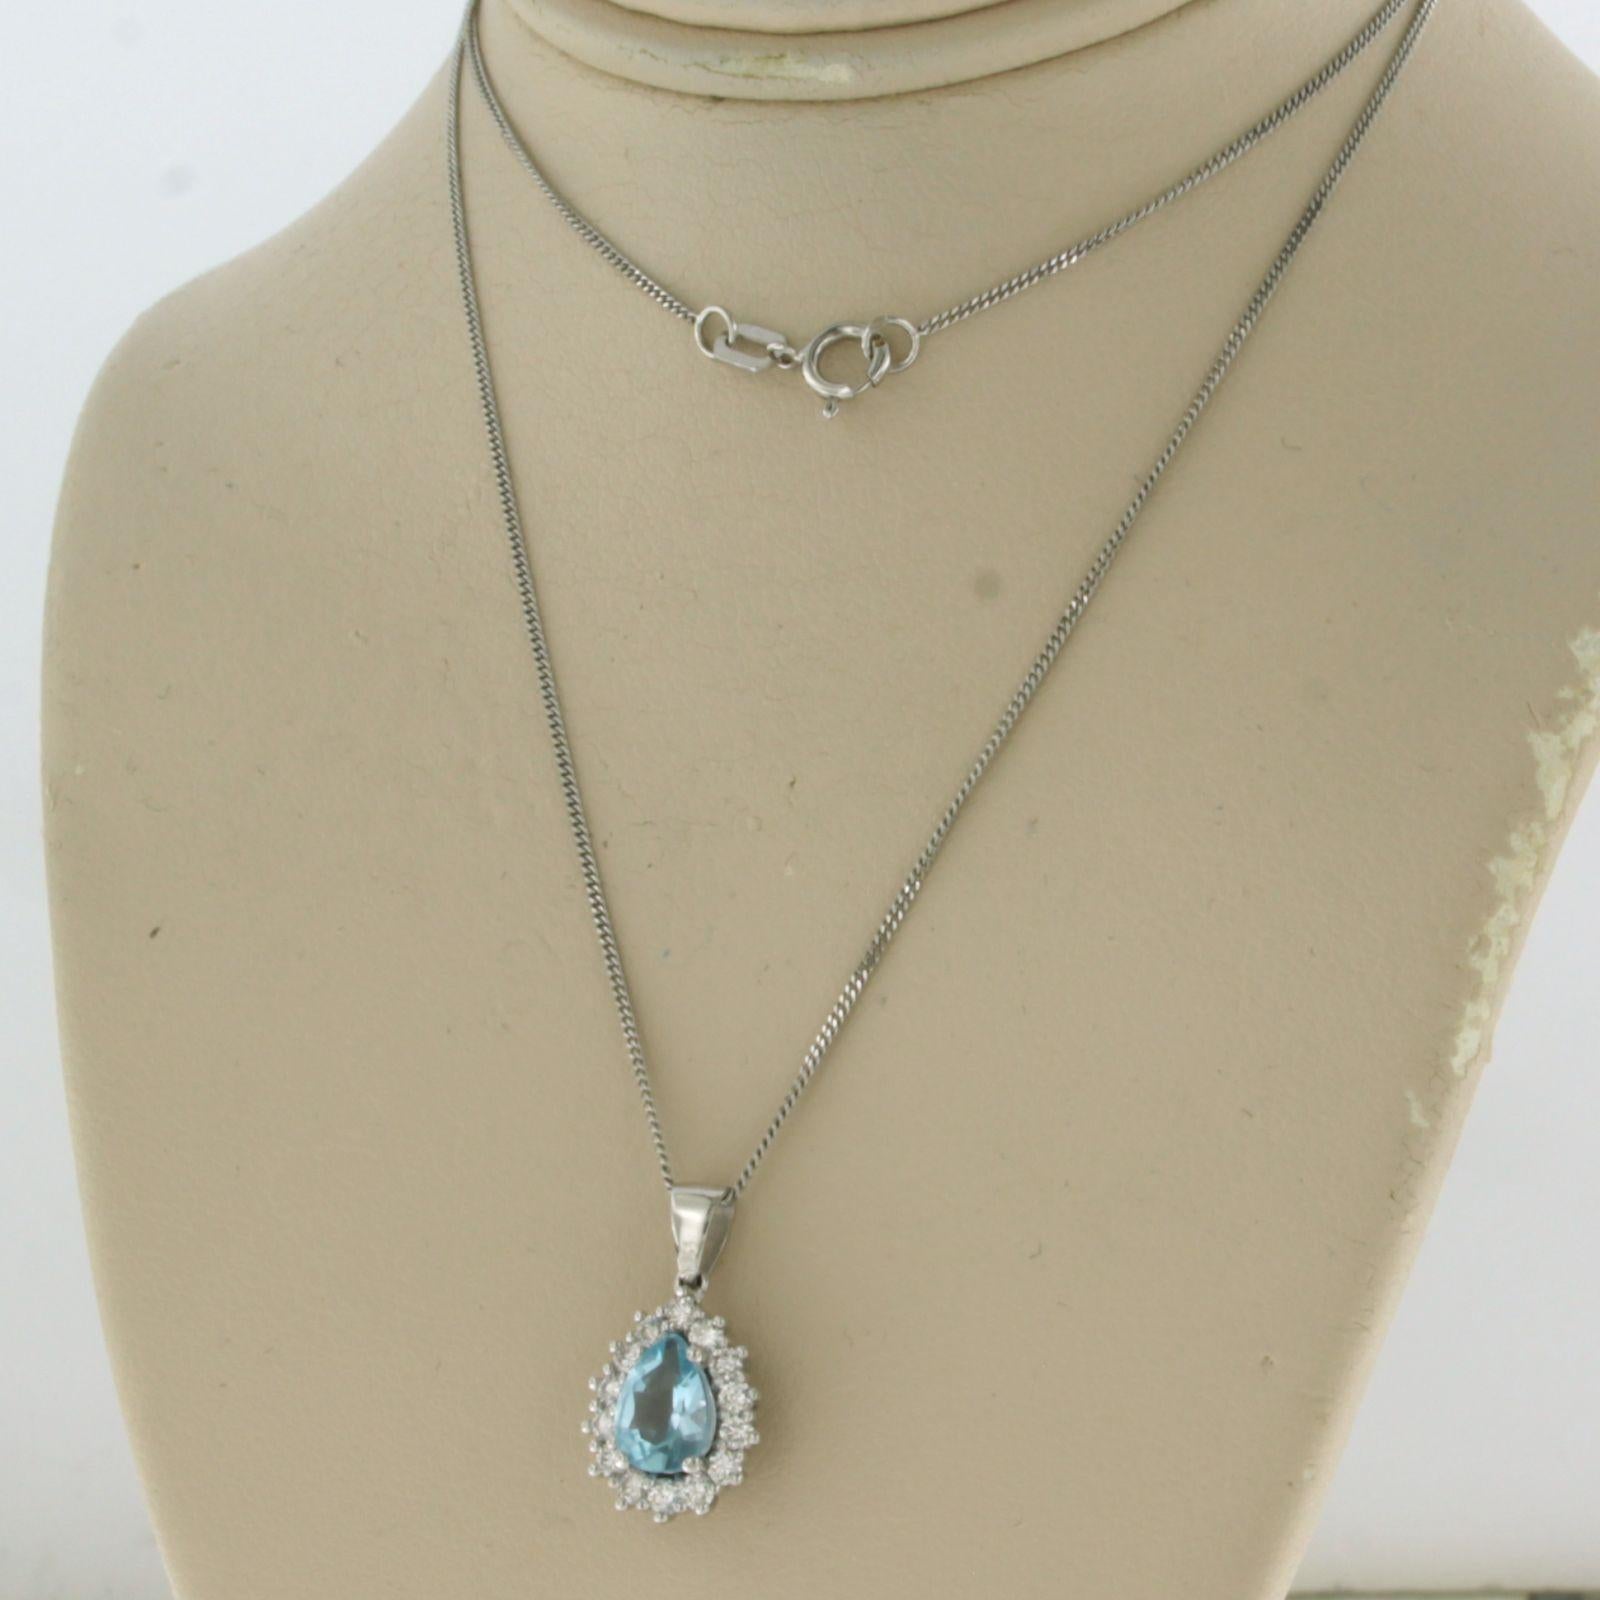 Brilliant Cut Necklace and pendant set with topaz and diamonds 14k white gold